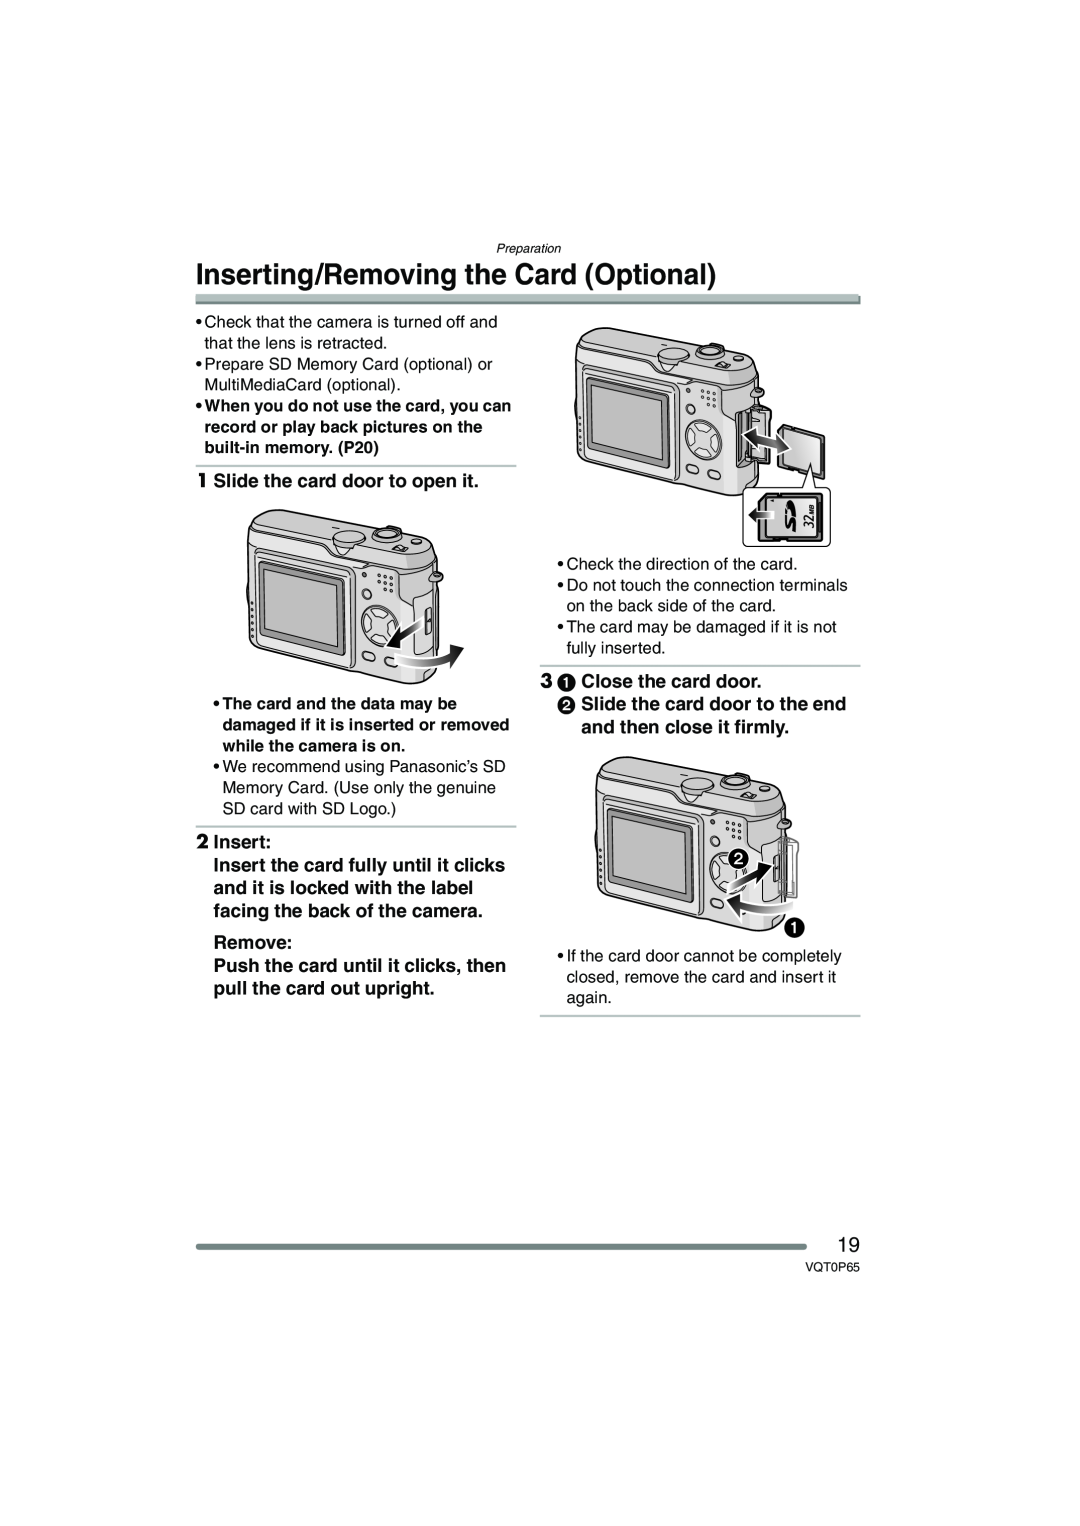 Panasonic DMC-LZ1PP Inserting/Removing the Card Optional, Slide the card door to open it, 3 1 Close the card door 